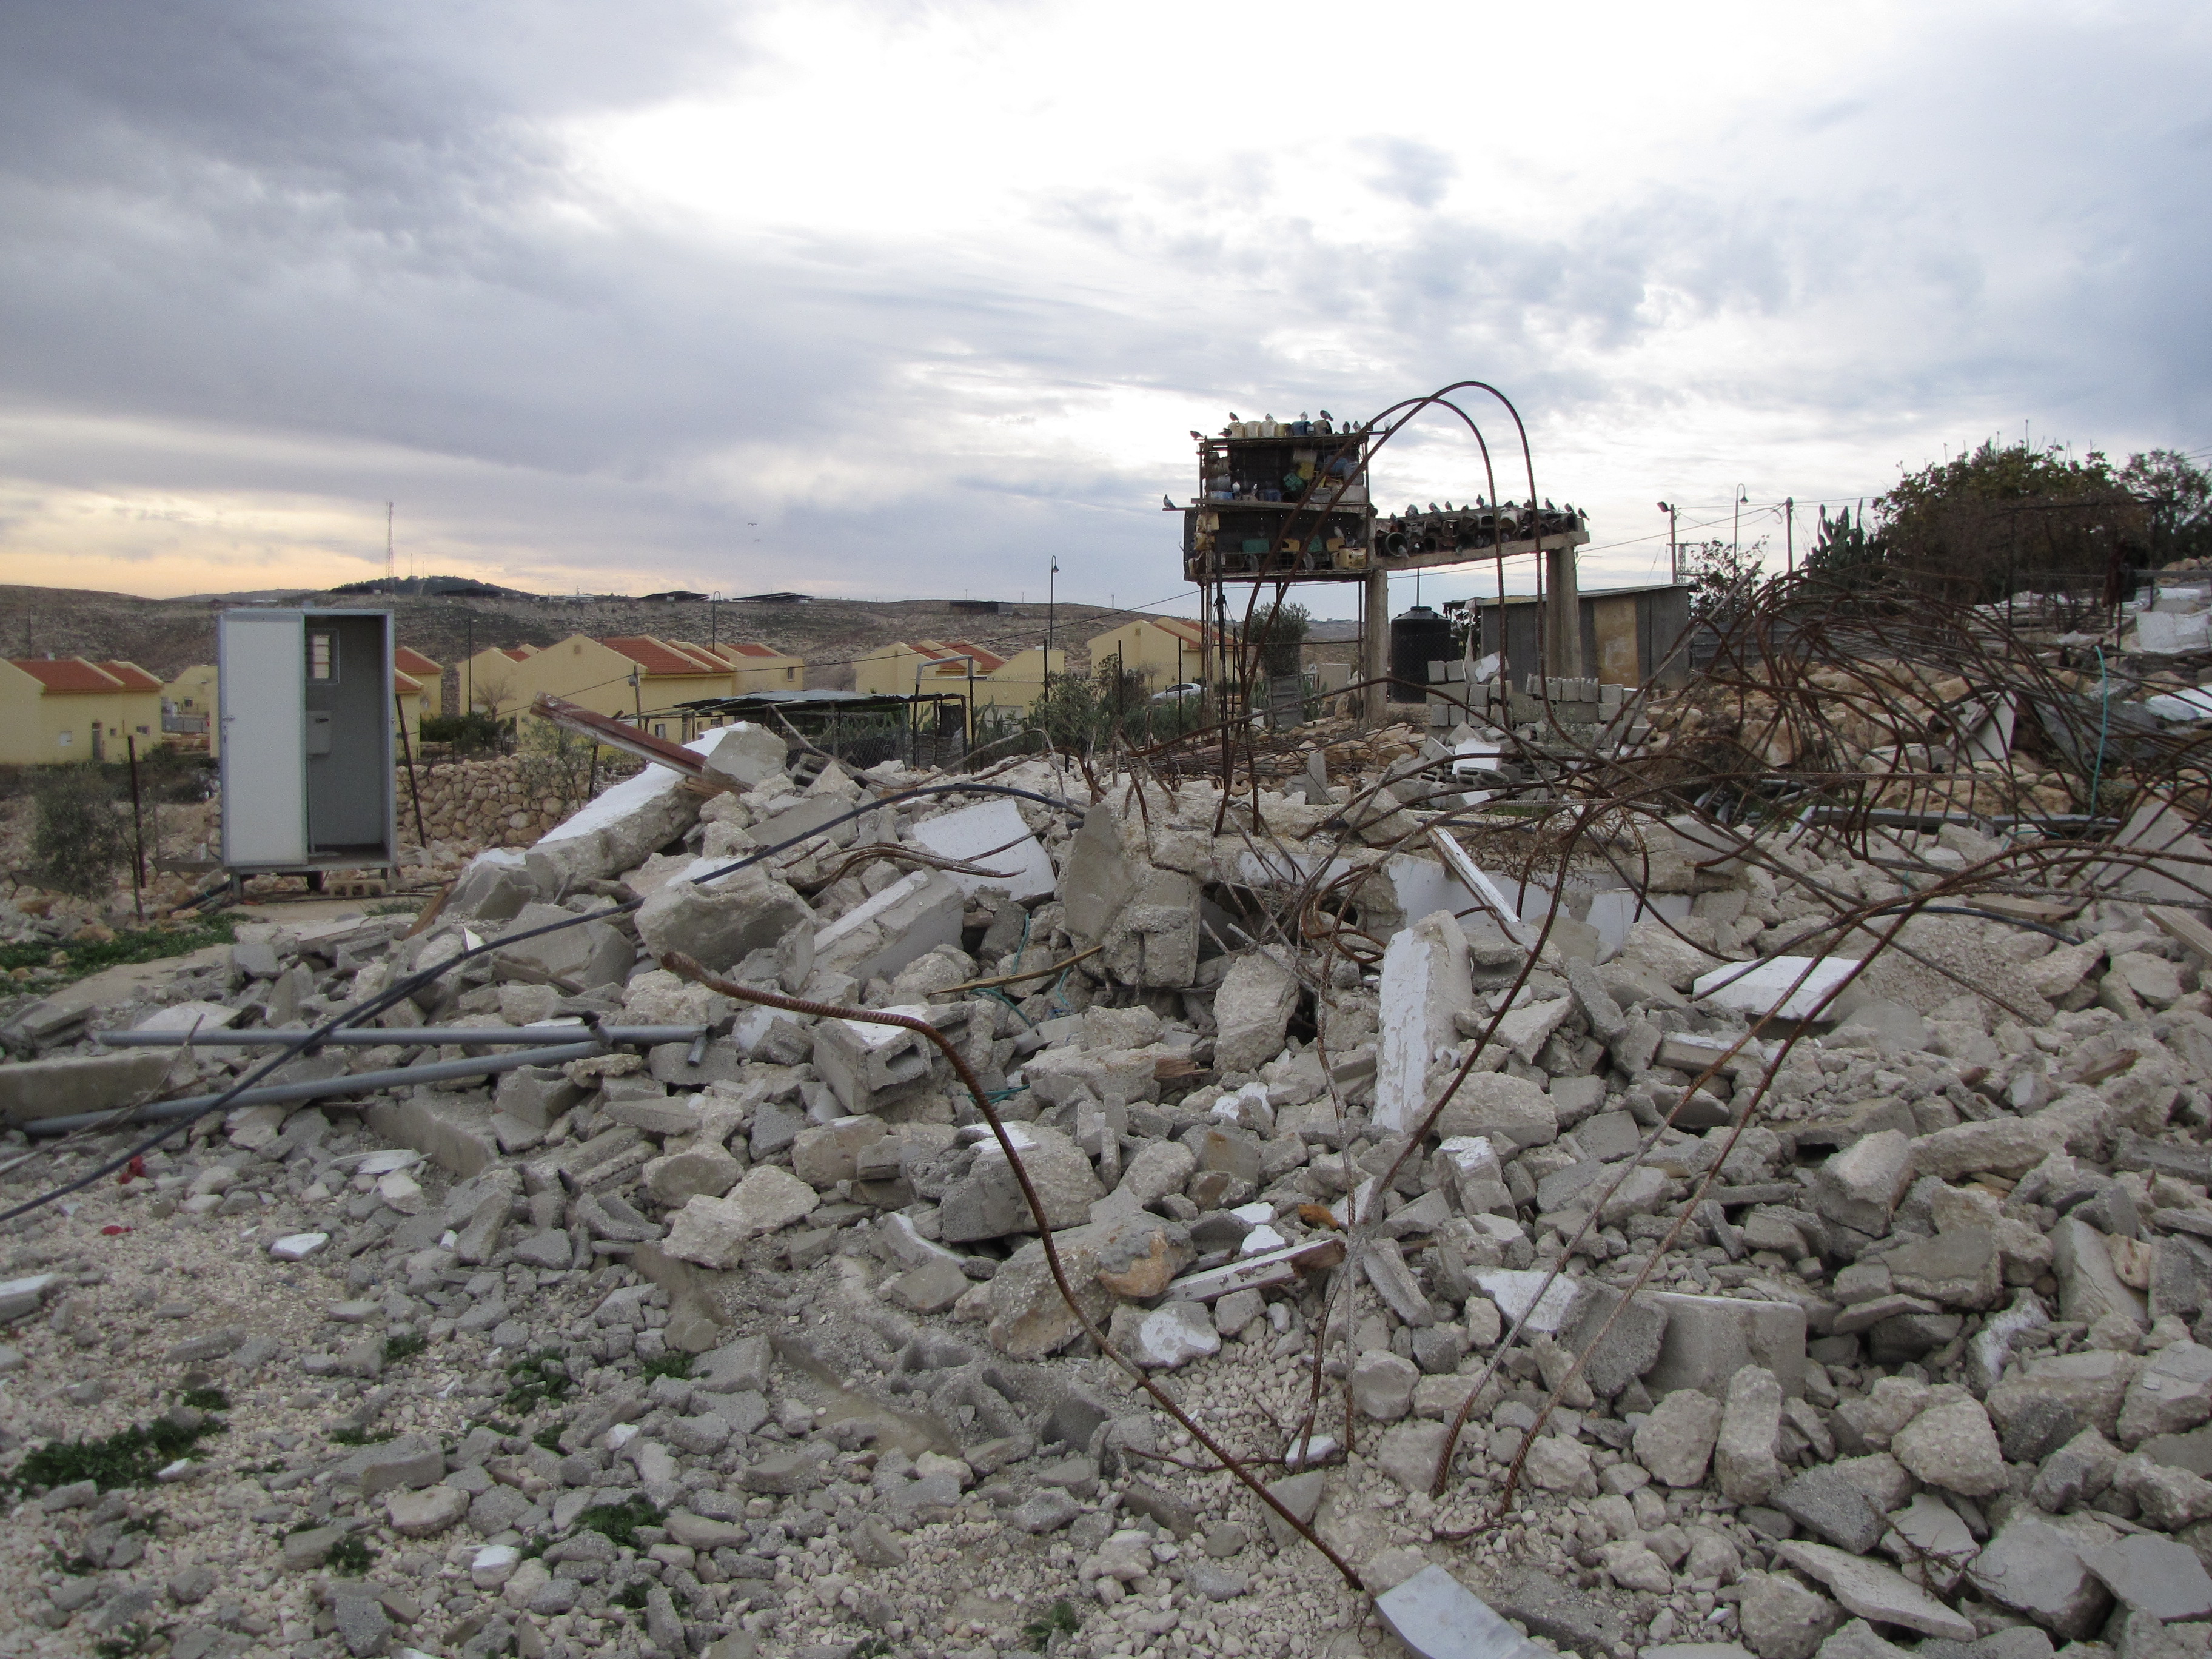 Israeli police bulldozed another Palestinian home. Thousands more are at risk of demolition.